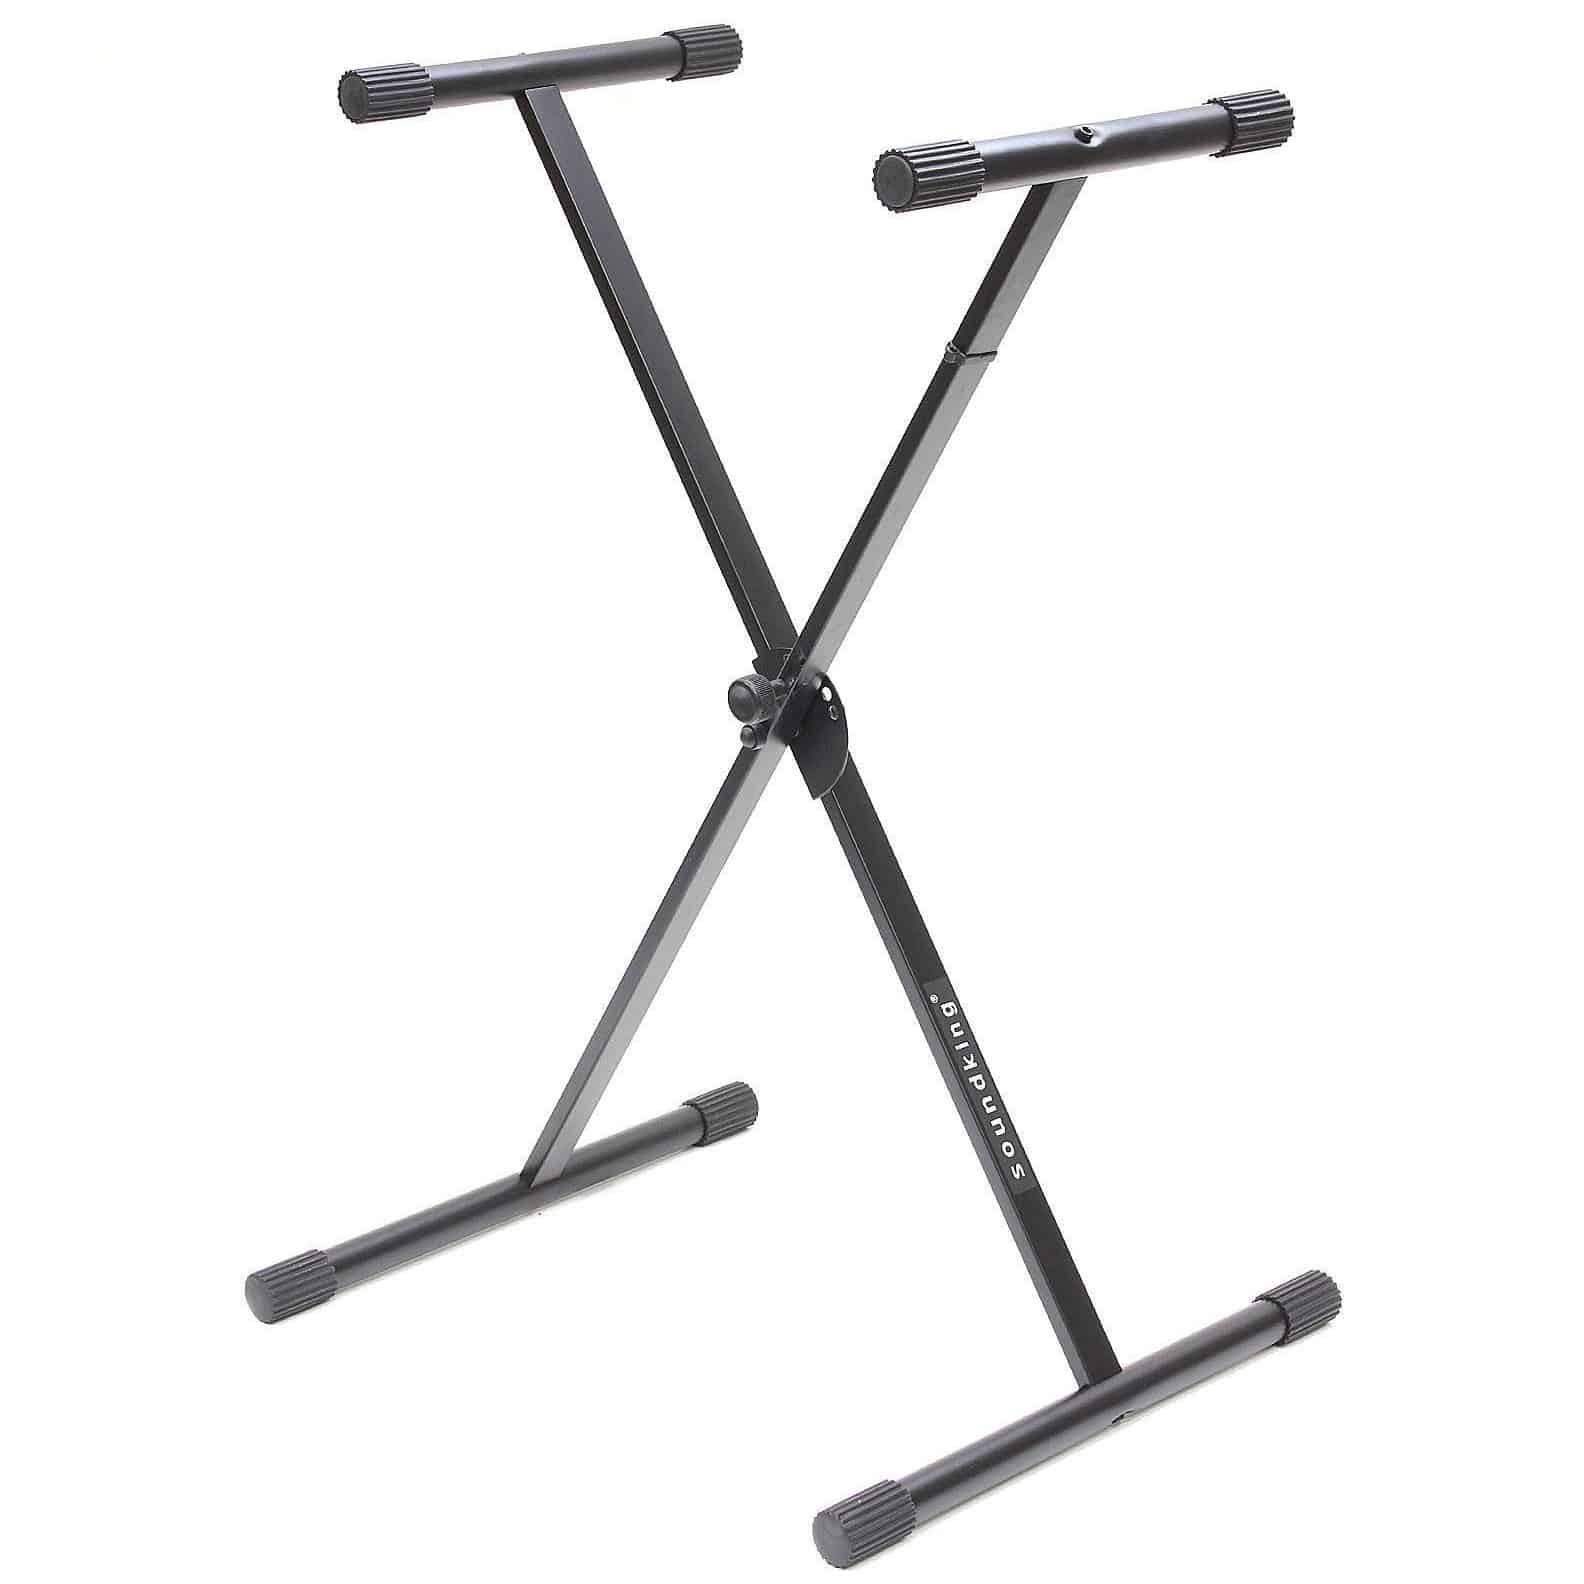 df002 keyboard stand soundking